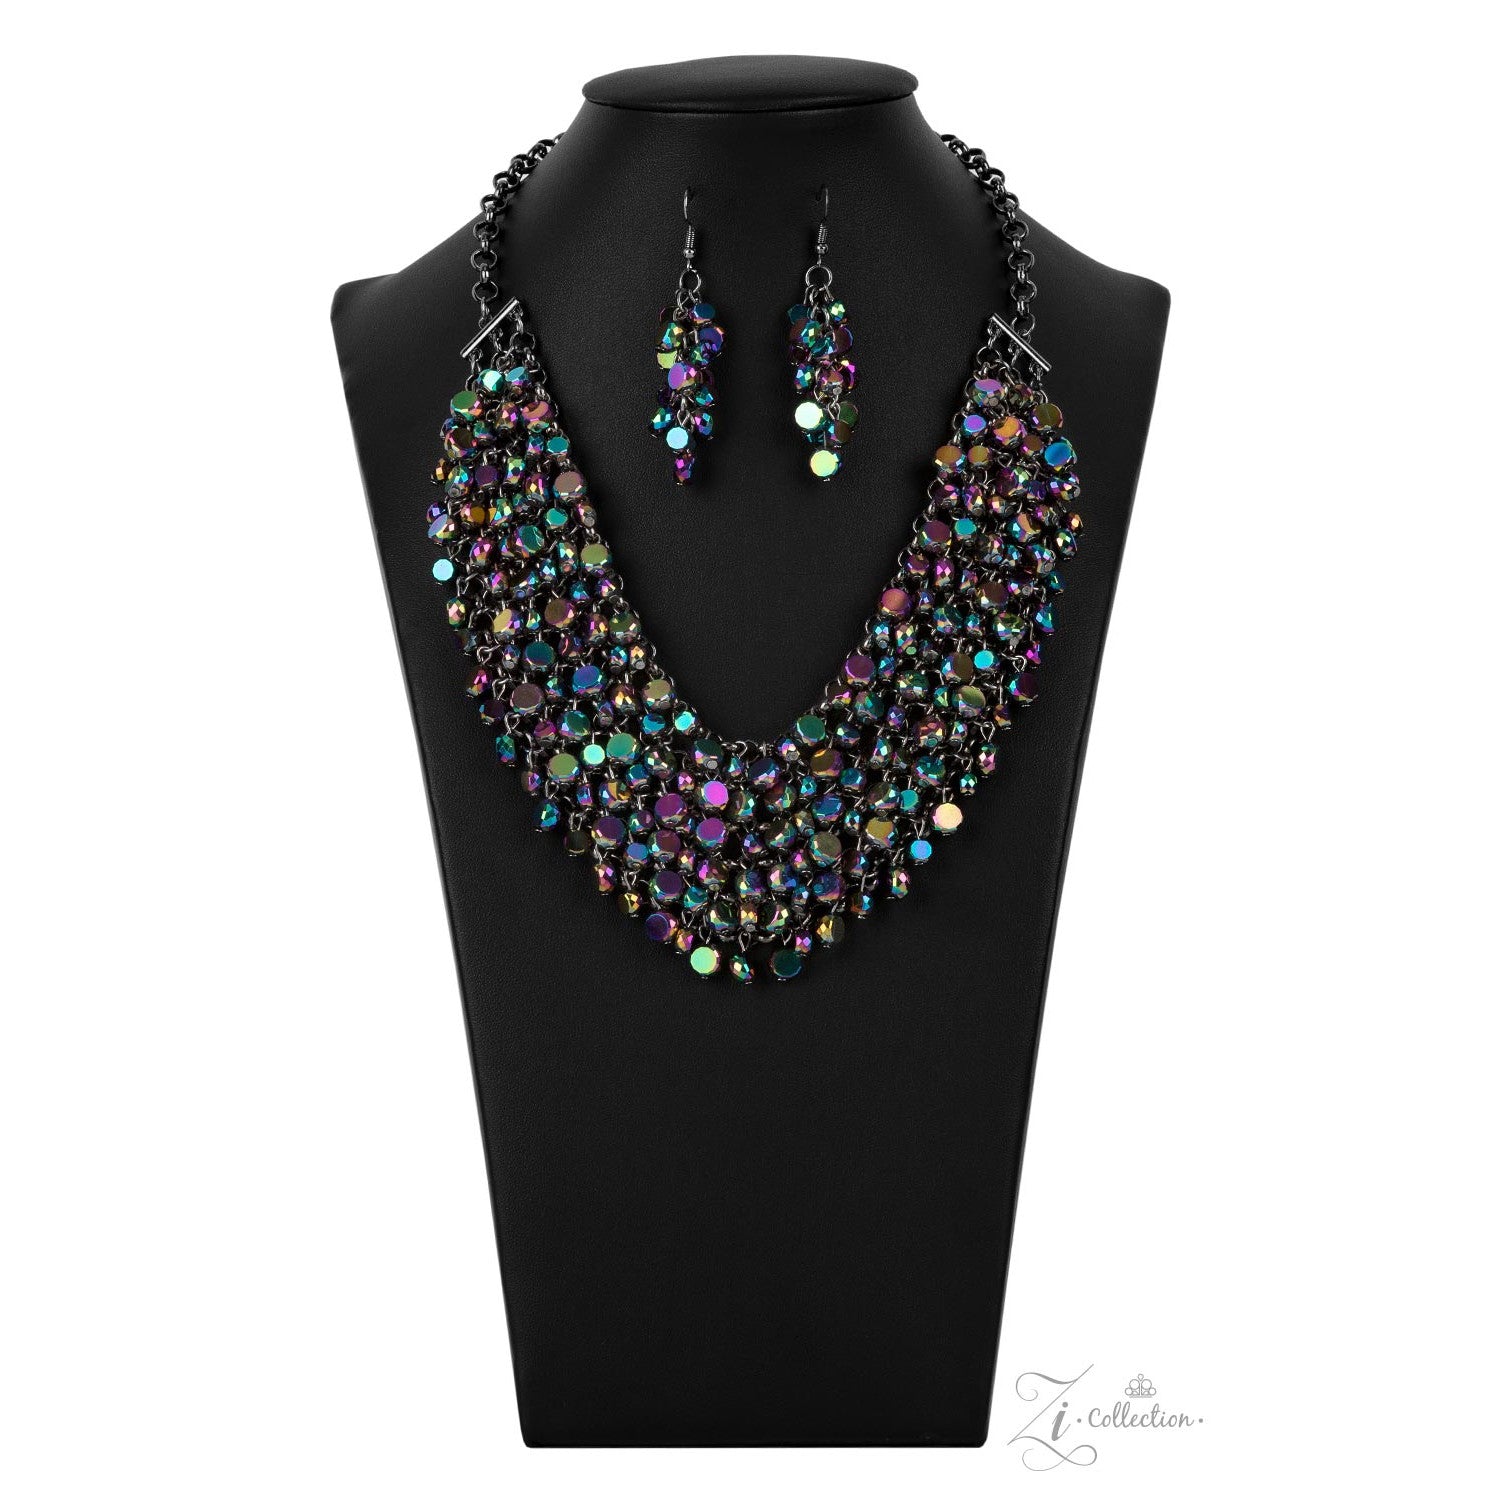 RETIRED VINTAGE- Vivacious 2021- Paparazzi Exclusive Zi Collection Oil Spill Necklace - A Large Selection Hand-Chains And Jewelry On rainbowartsreview,Women's Jewelry | Necklaces, Earrings, Bracelets